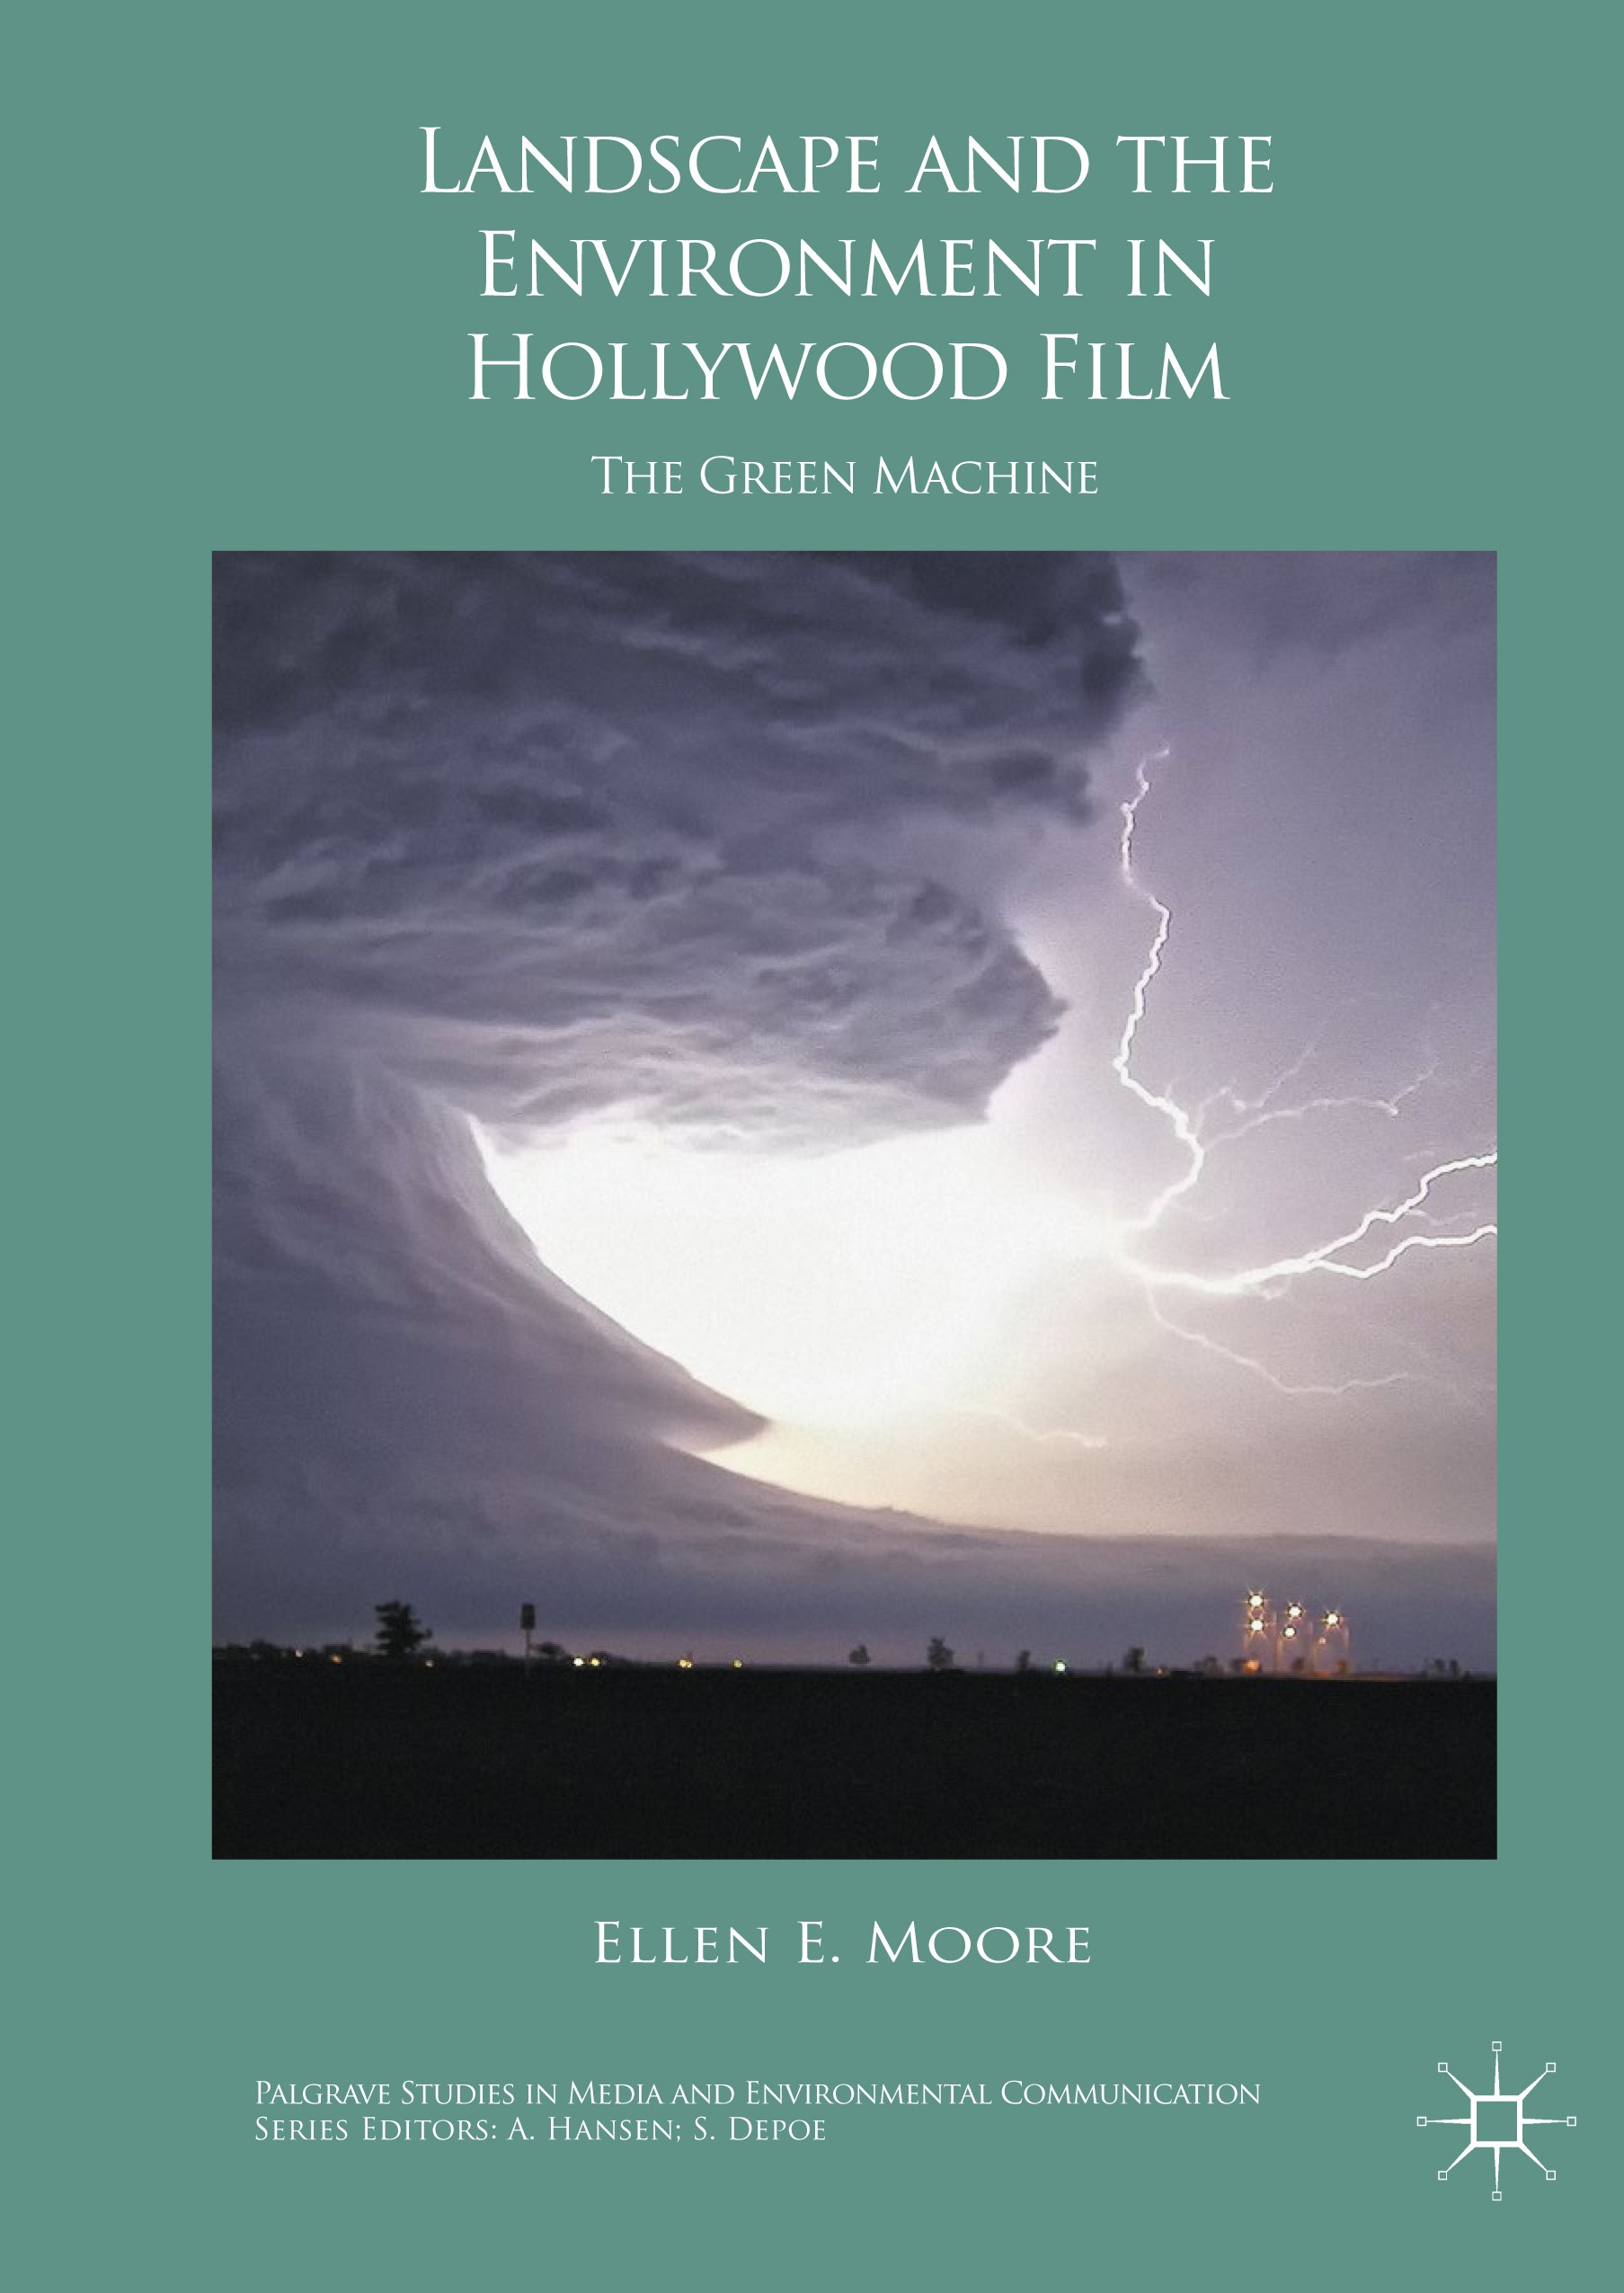 Stranger than (Science) Fiction: Environmental Dystopia in Hollywood Sci-Fi